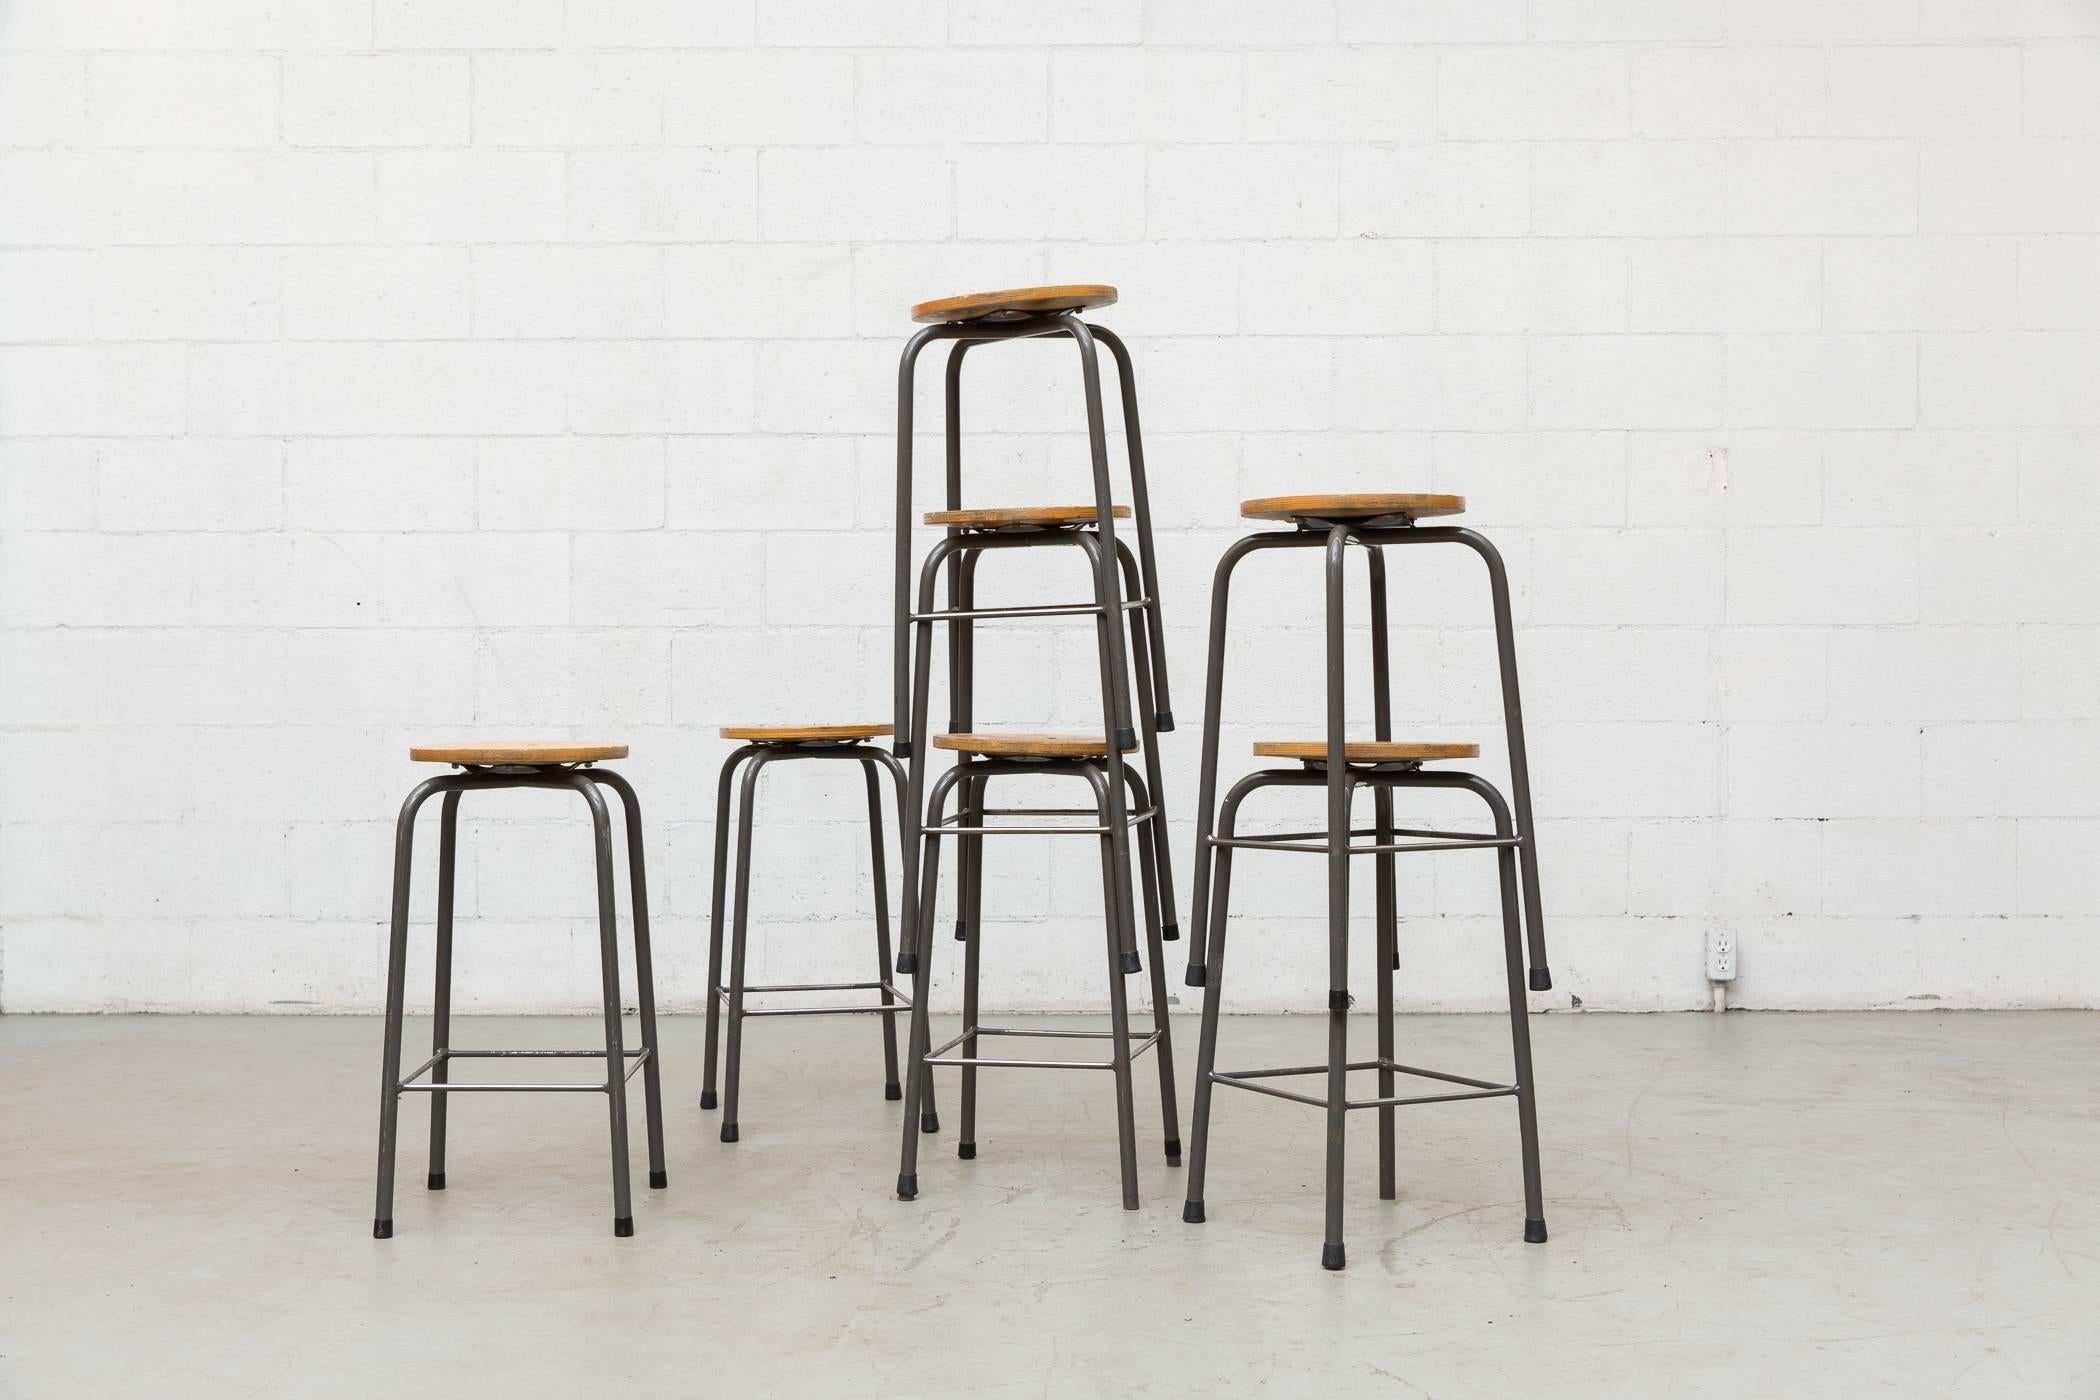 Nice stock of Industrial task stools with grey enameled metal frames and wood seats. Some drilled, carved, loved. Very original condition.